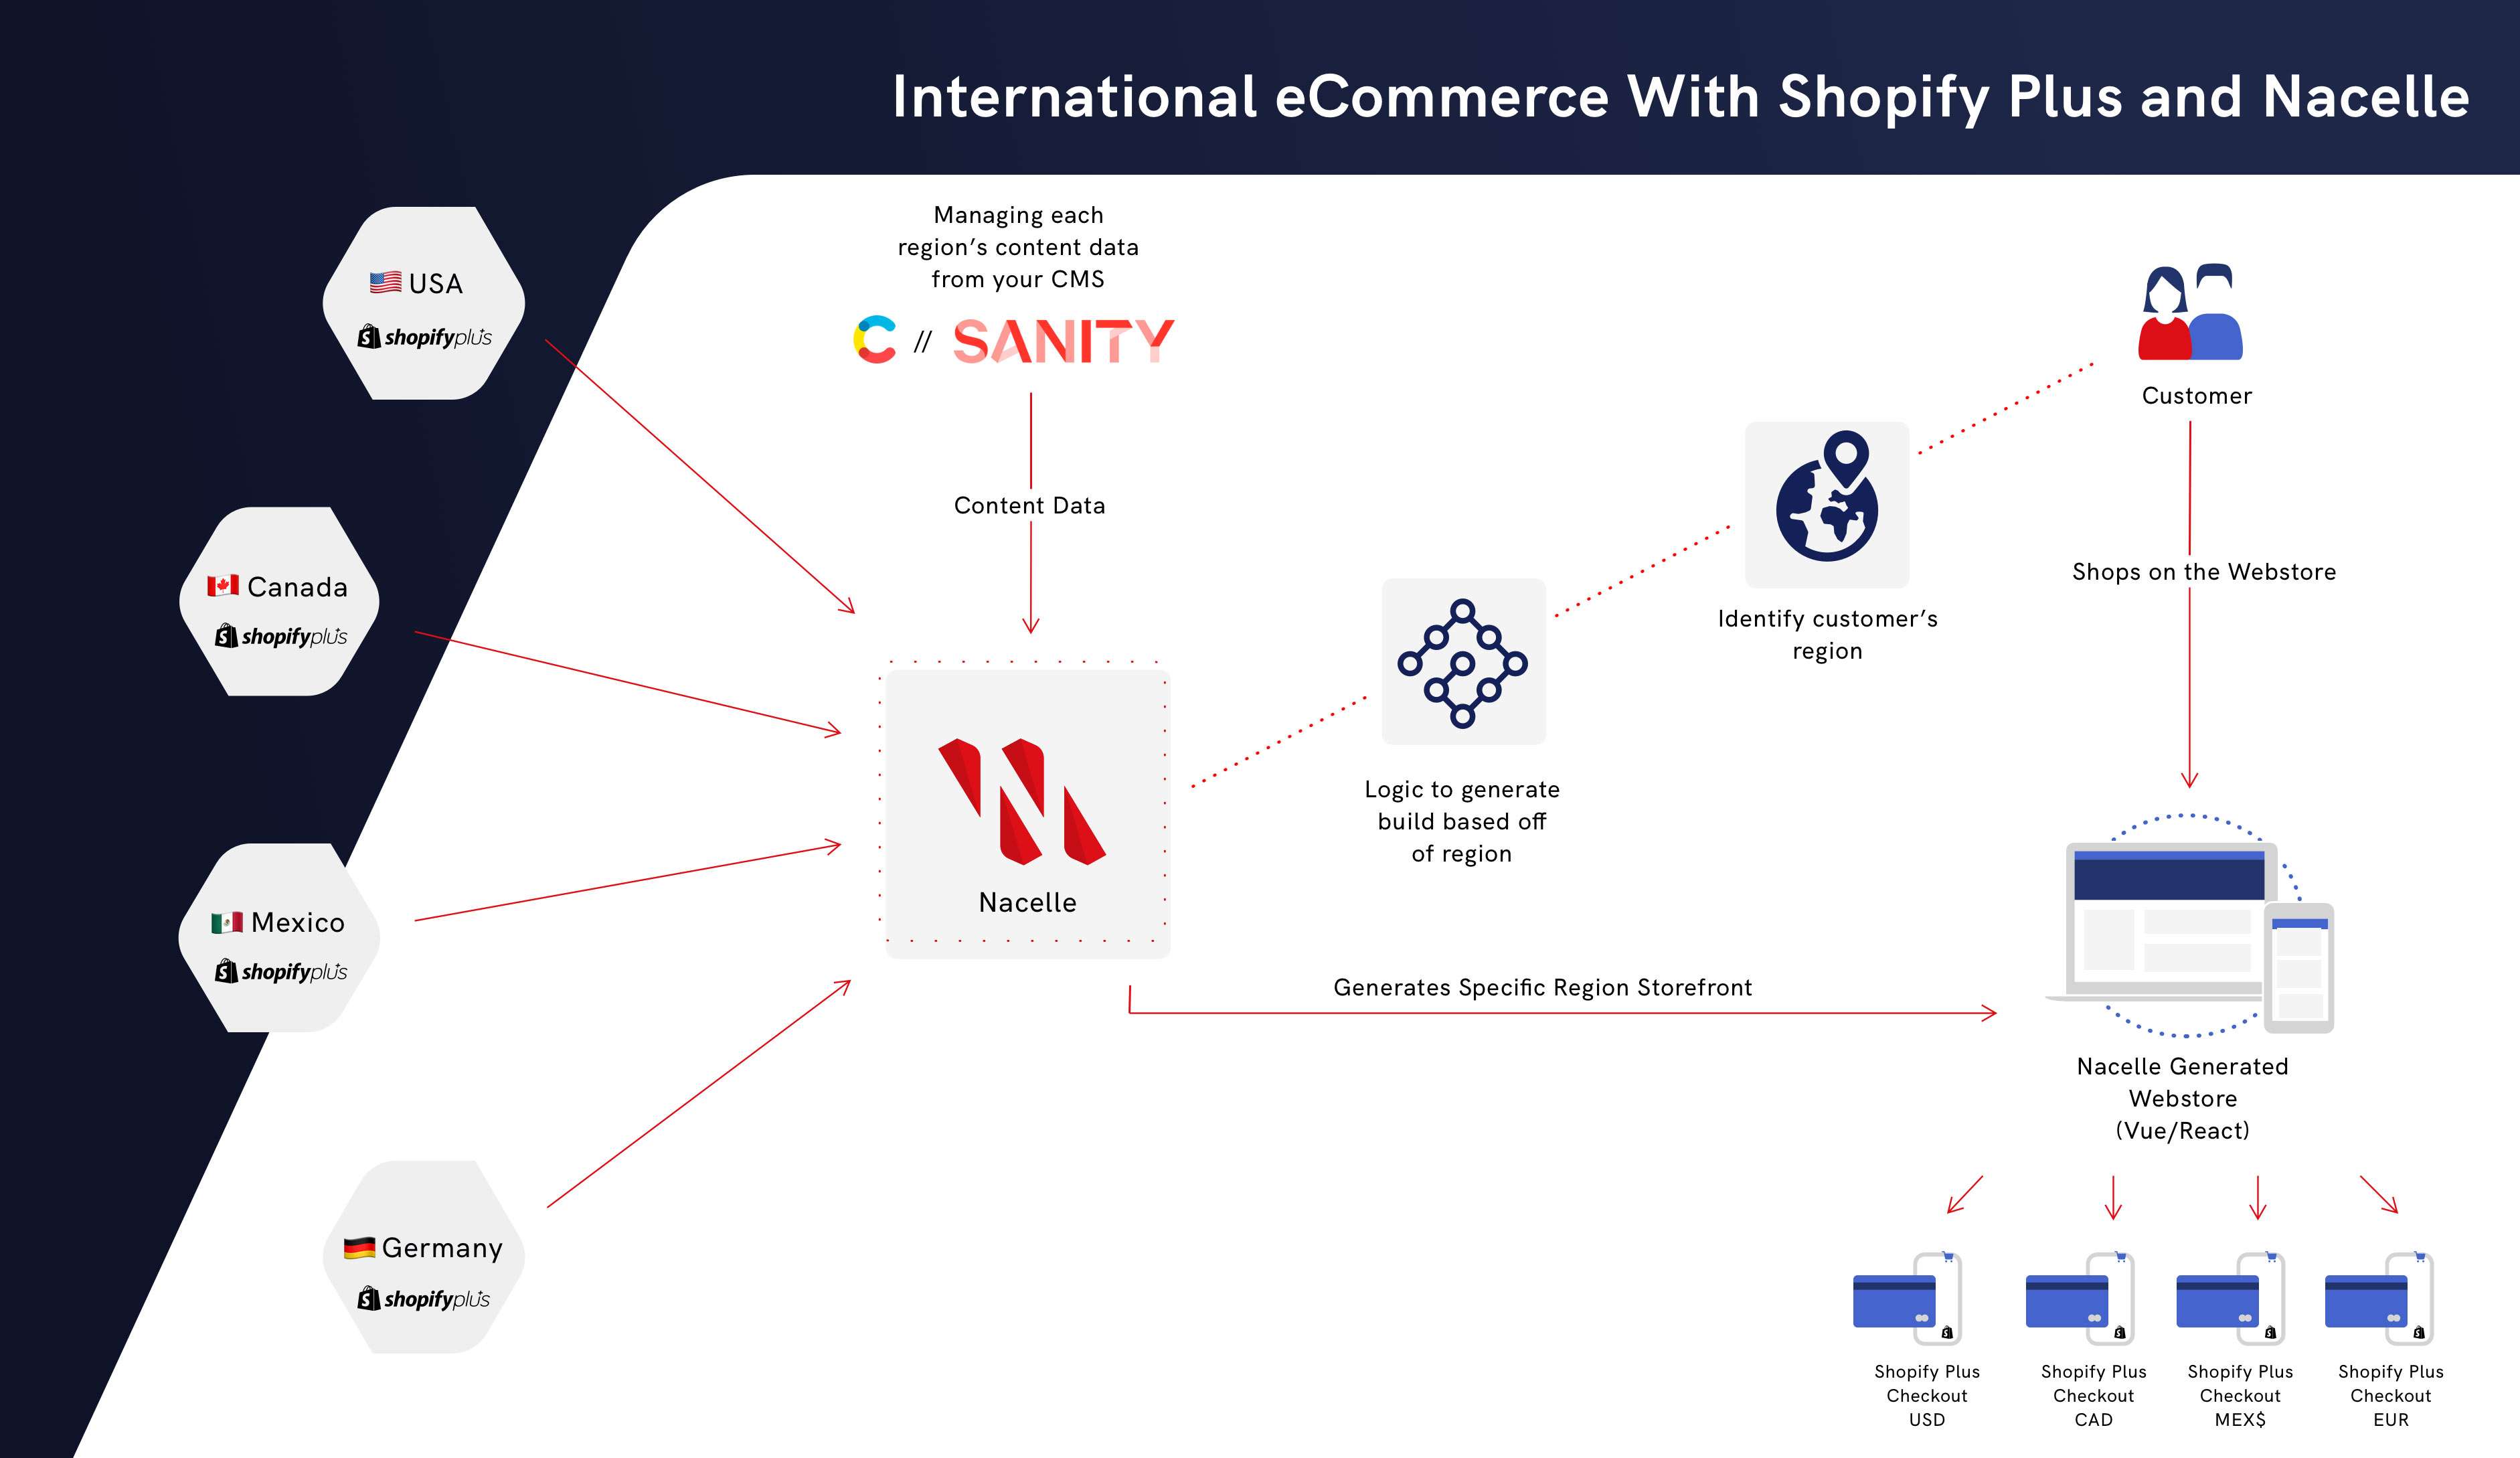 International eCommerce with Shopify Plus and Nacelle